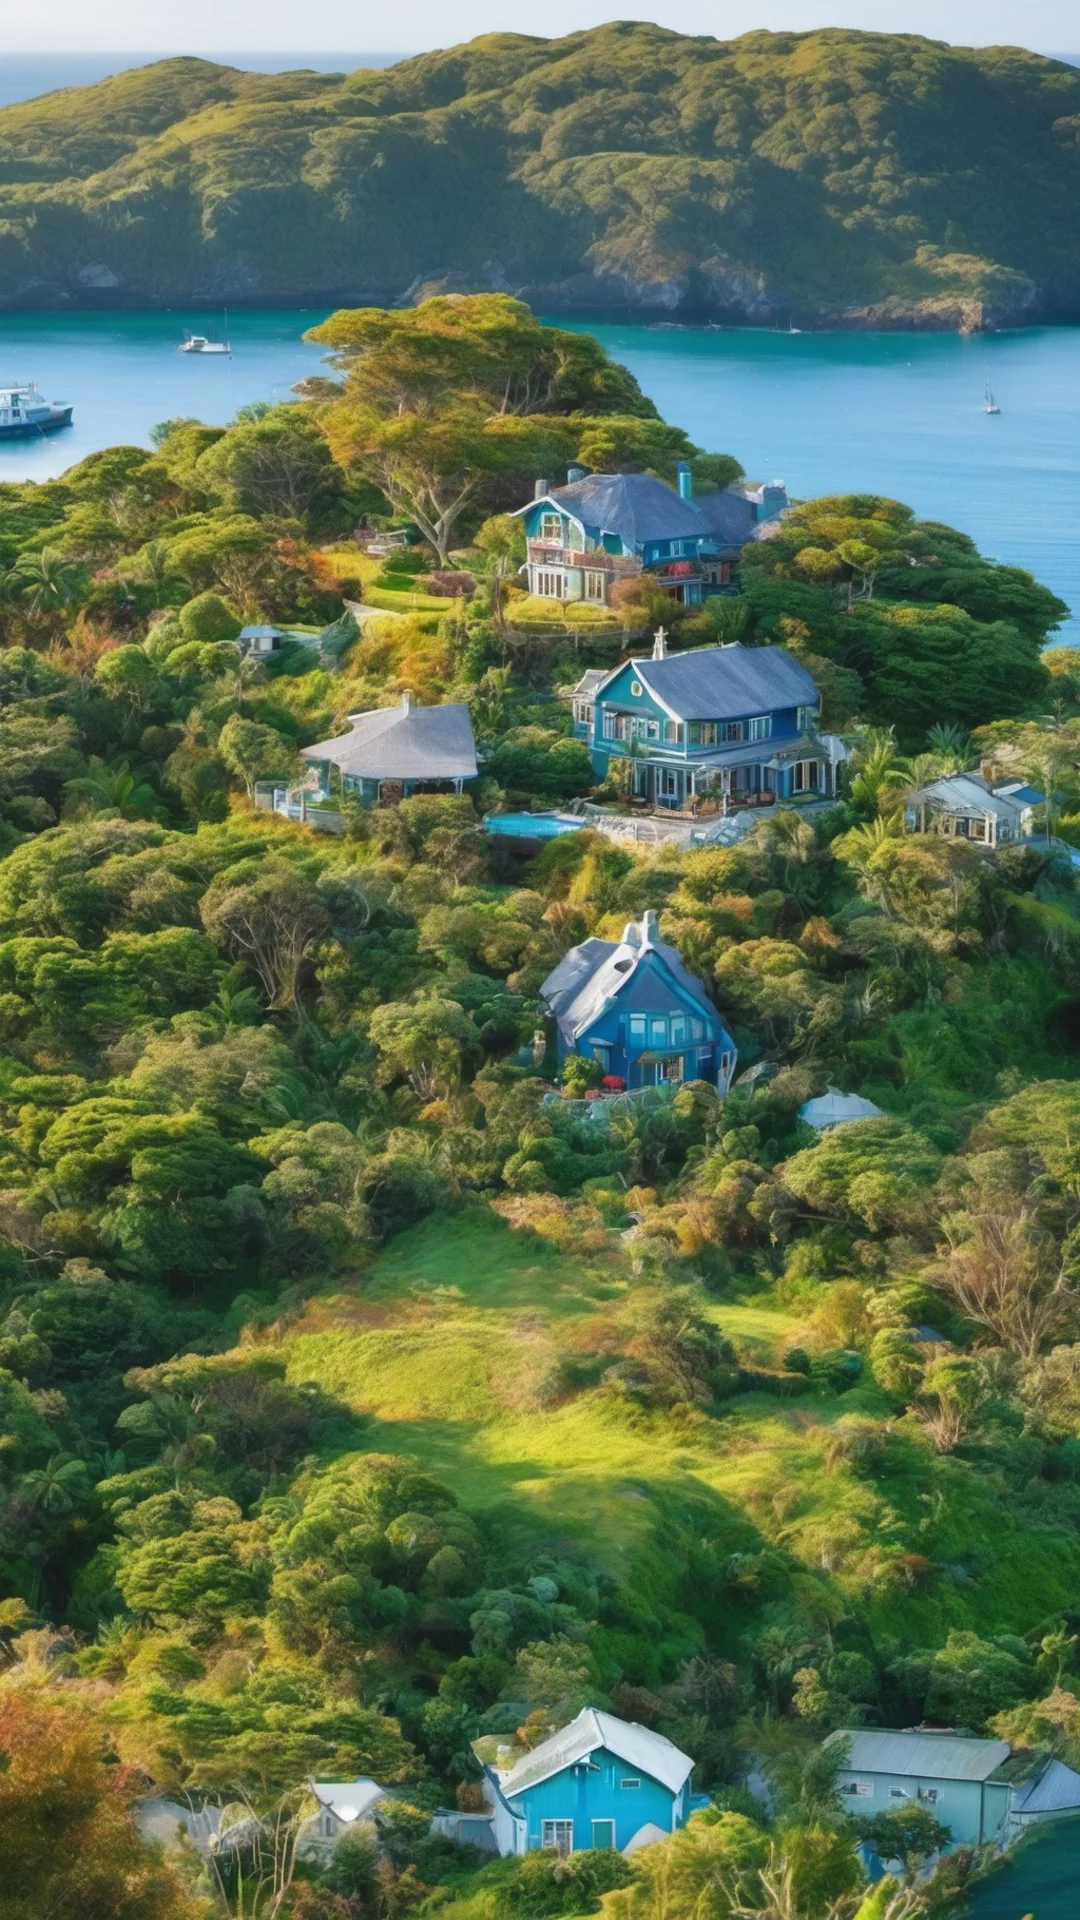 aipicturesque landscape  beautiful colorful tones bay of islands grace stunning cottage with colorful green and blue earth like planet rising amazing awesome portrait 2 tall